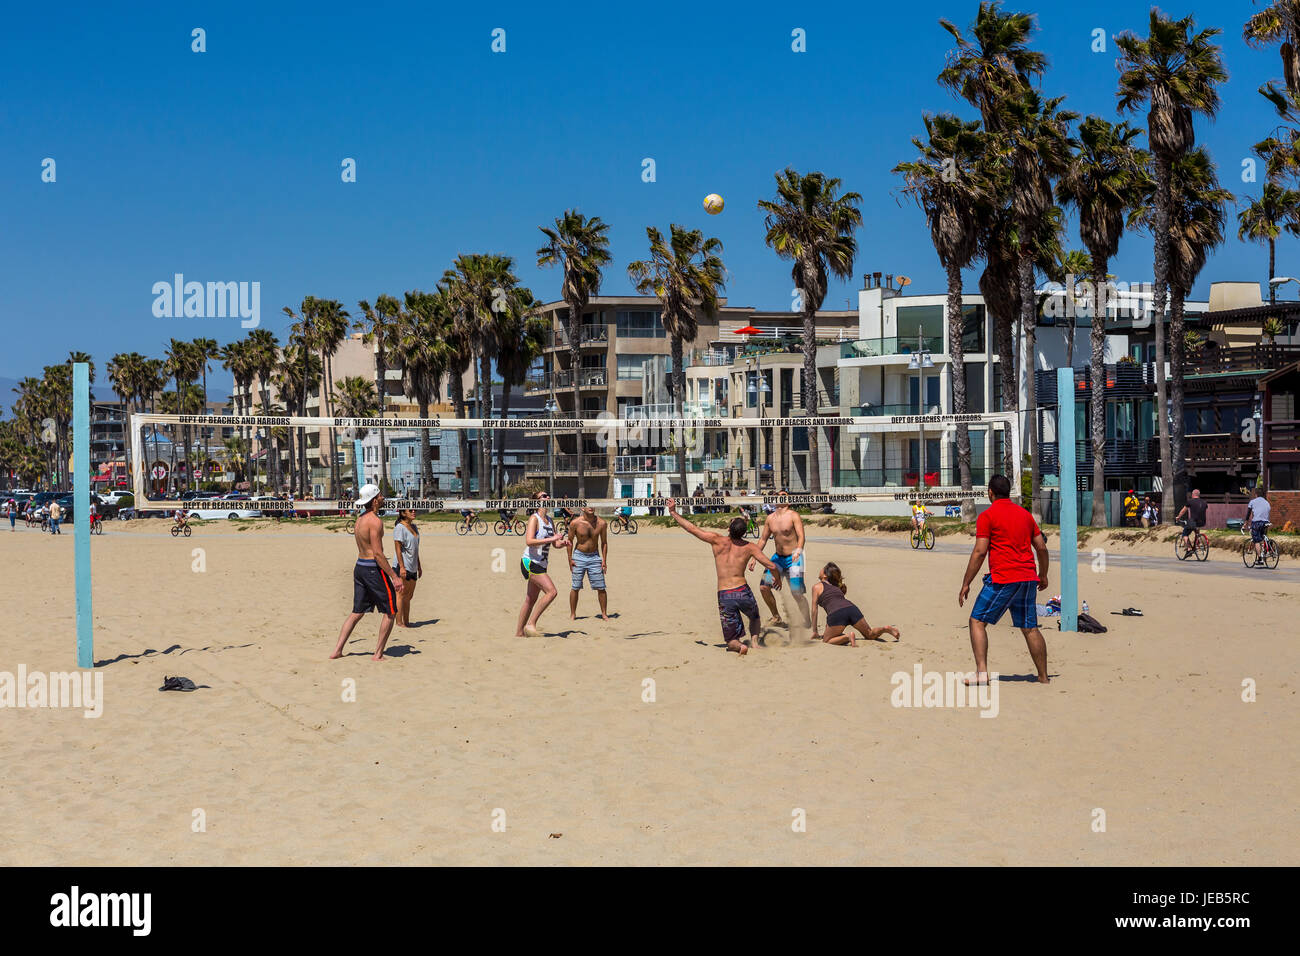 people, volleyball players, playing beach volleyball, beach volleyball game, beach volleyball, Venice Beach, Venice, Los Angeles, California Stock Photo